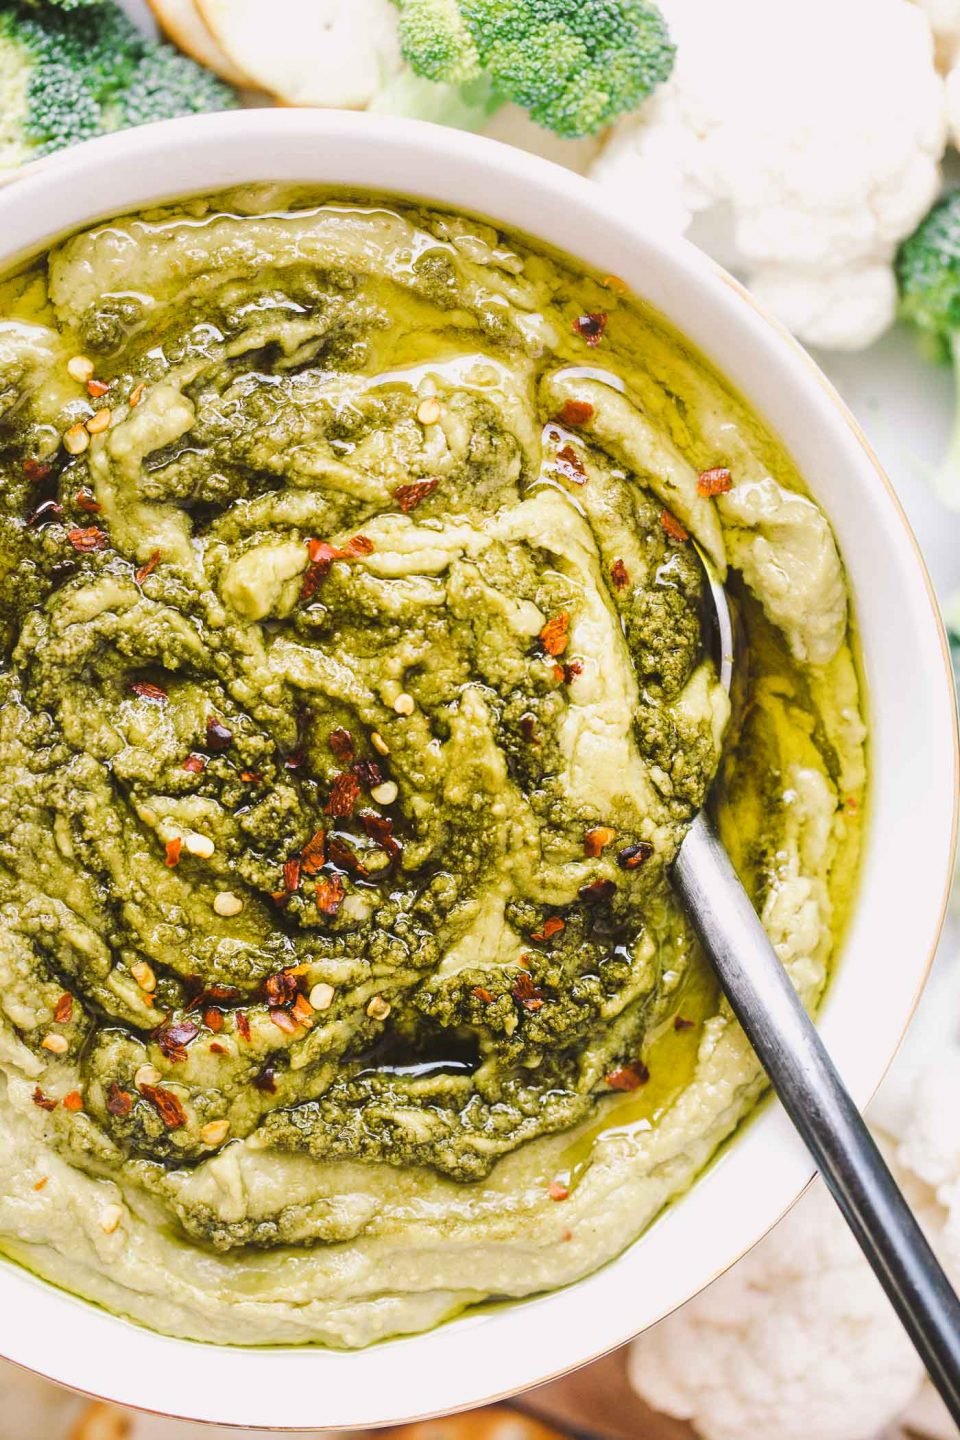 a creamy, dreamy, totally addictive white bean hummus loaded with the bright flavors of pesto & lemon. perfect for healthy end-of-summer snacking, an easy appetizer to bring to potlucks, or the perfect snack to bring to a football party!